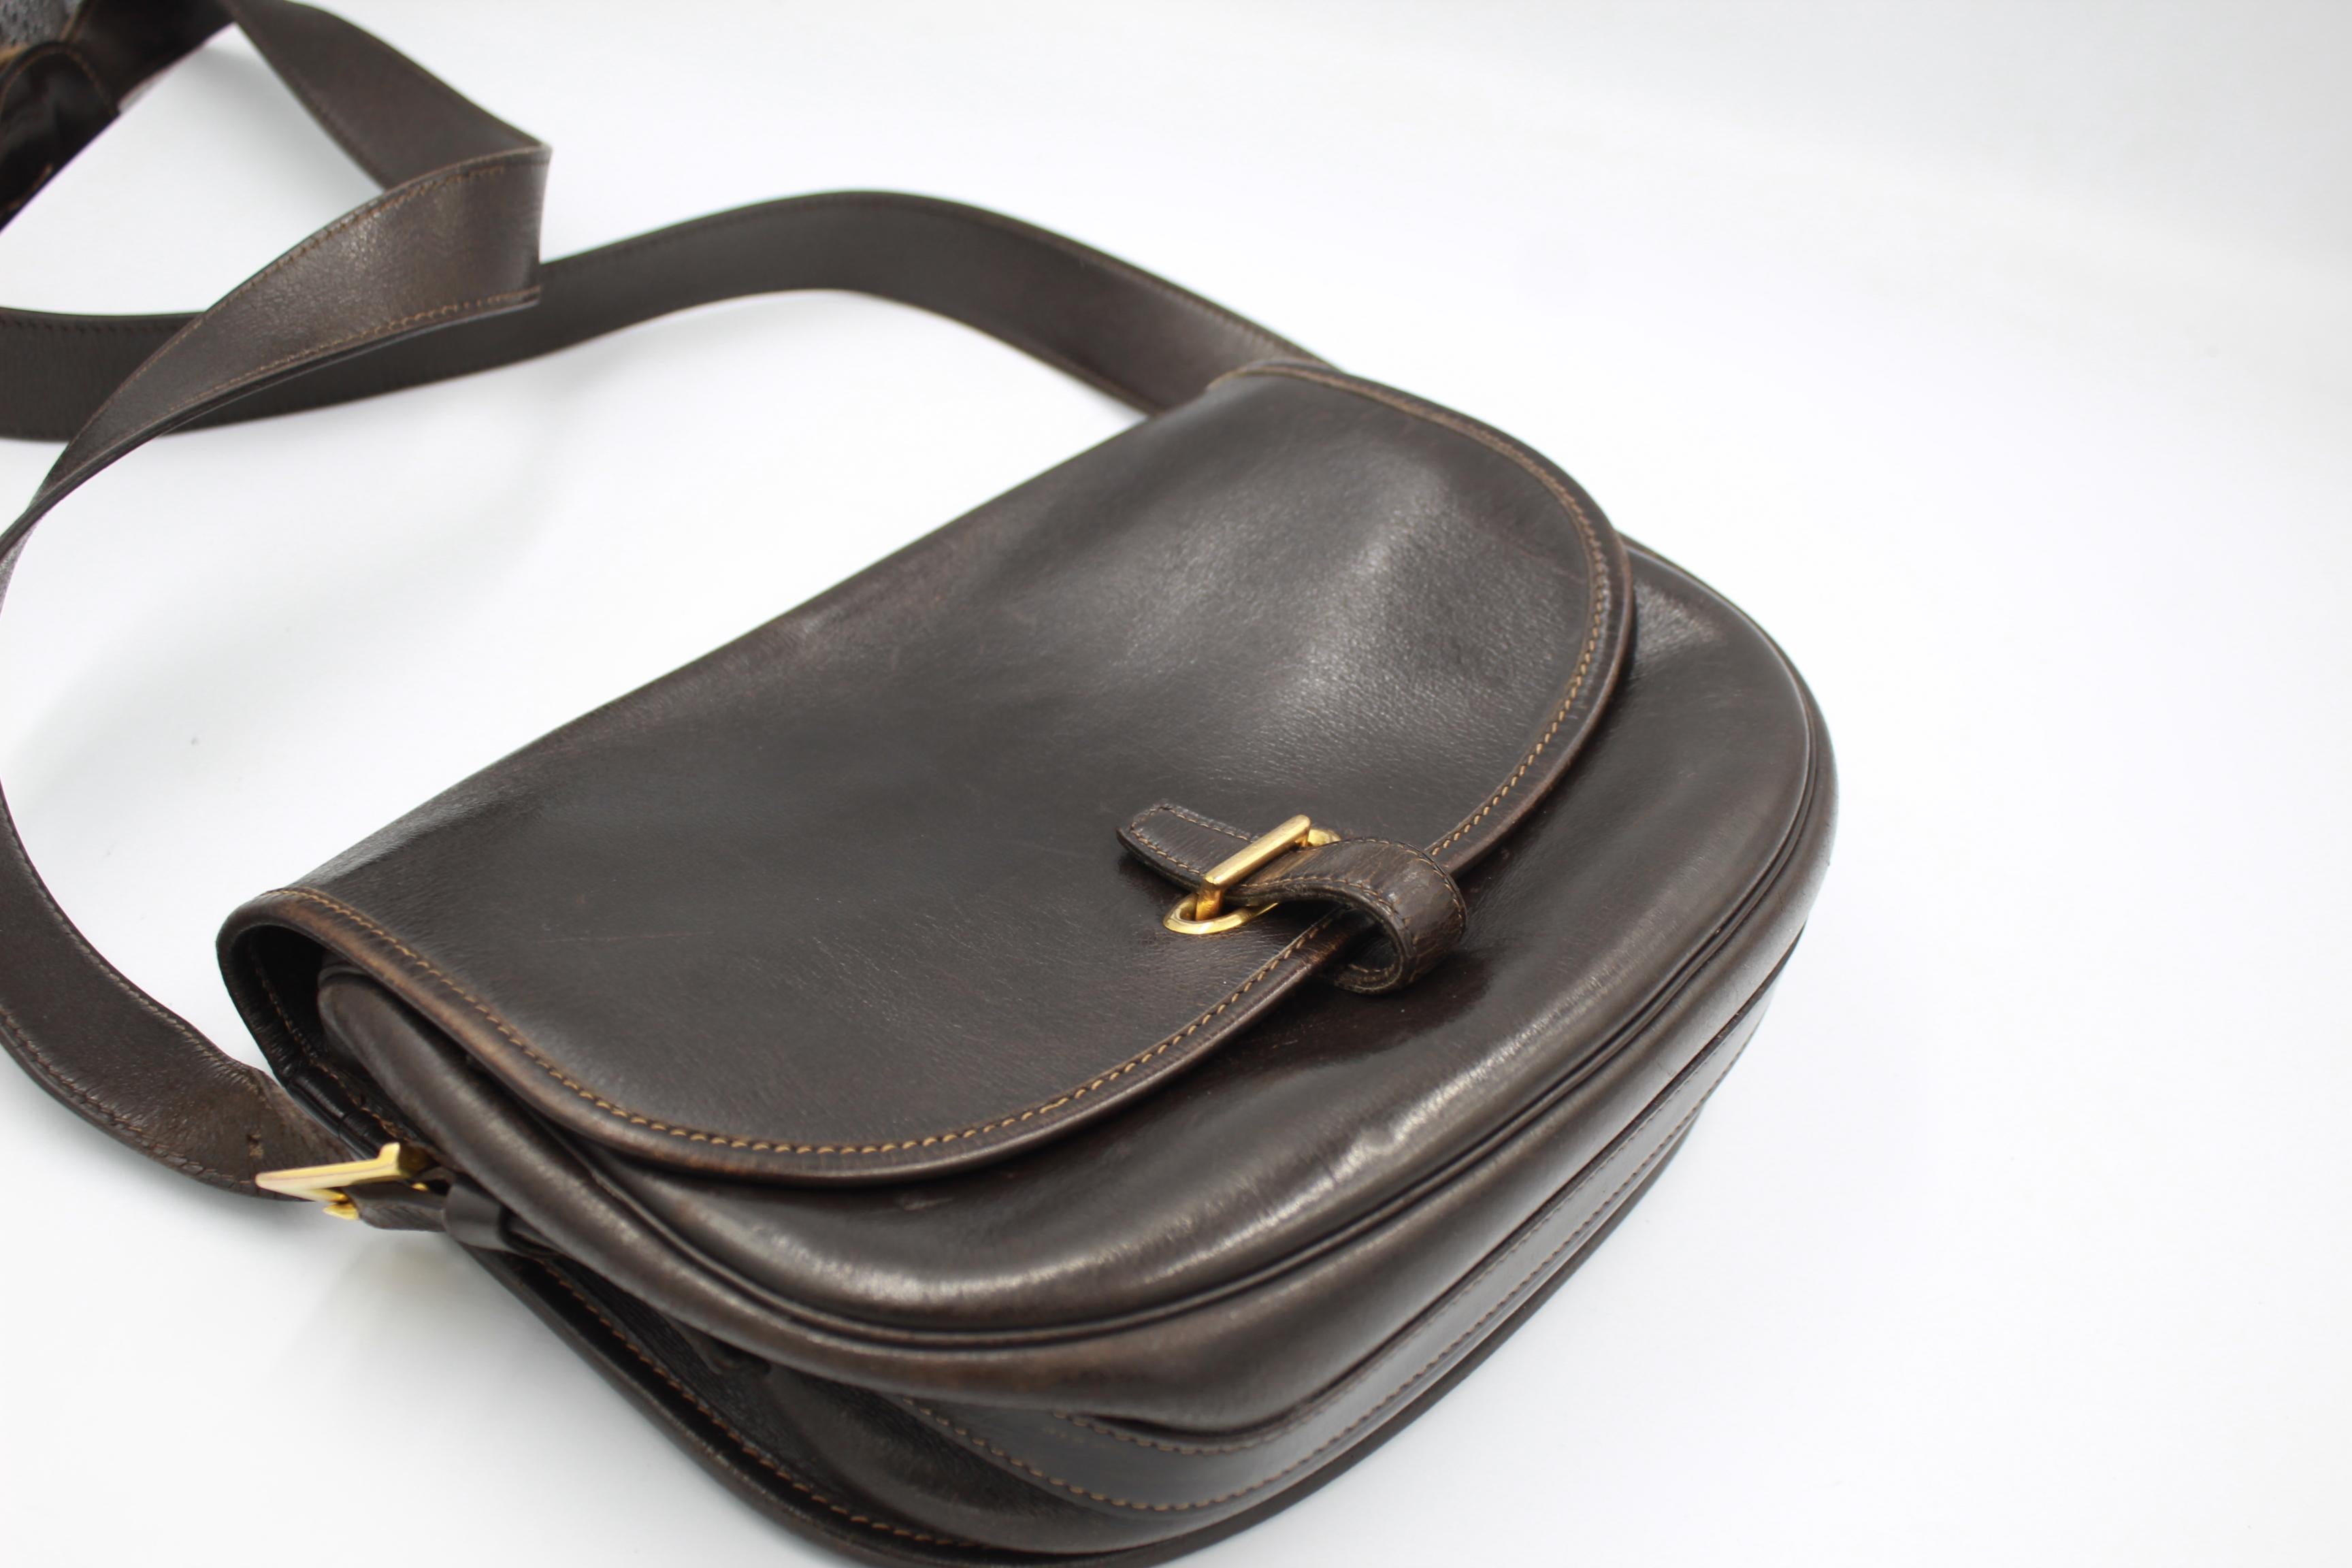 Hermes « Balle de Golf » handbag in dark brown leather/
Vintage bag.
Good vintage condition :
( leather cracked towards the flaps and little scratches on the leather ).
Can be wron cross body.
Adjustable shoulder strap.
16cm x 23cm x 6cm